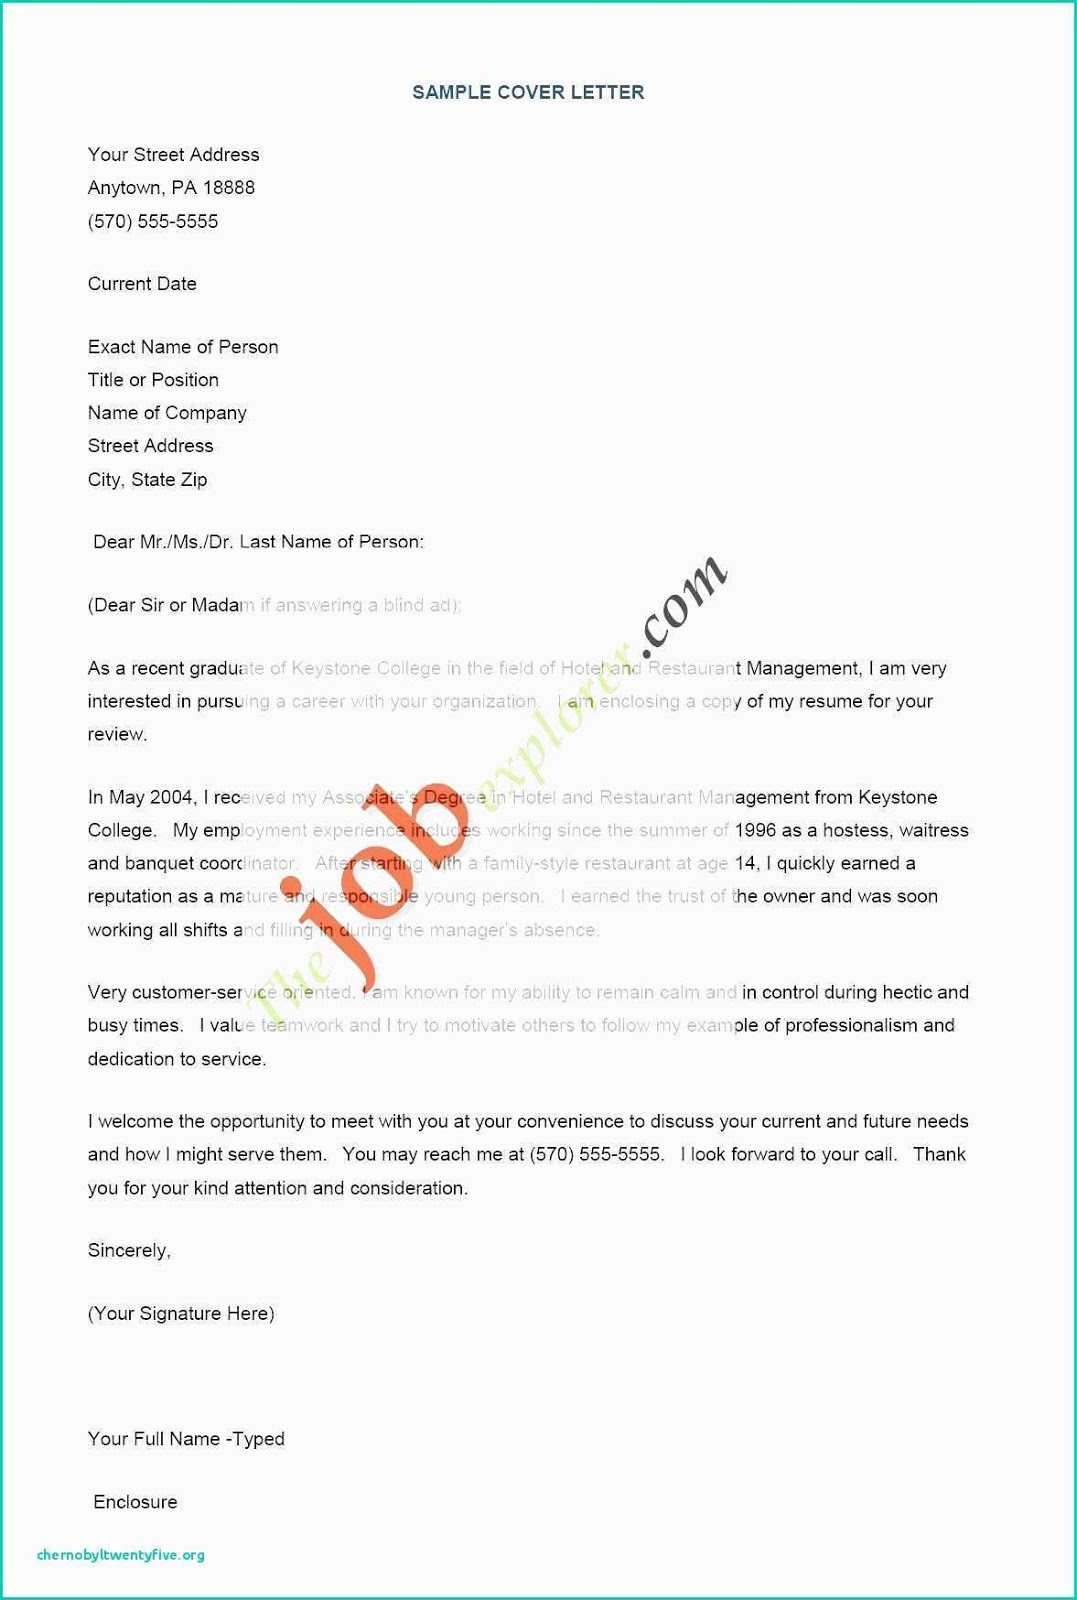 ladders resume service ladders resume writing service ladders resume writing service review ladders resume writing service 2019 ladders resume writing service review 2020